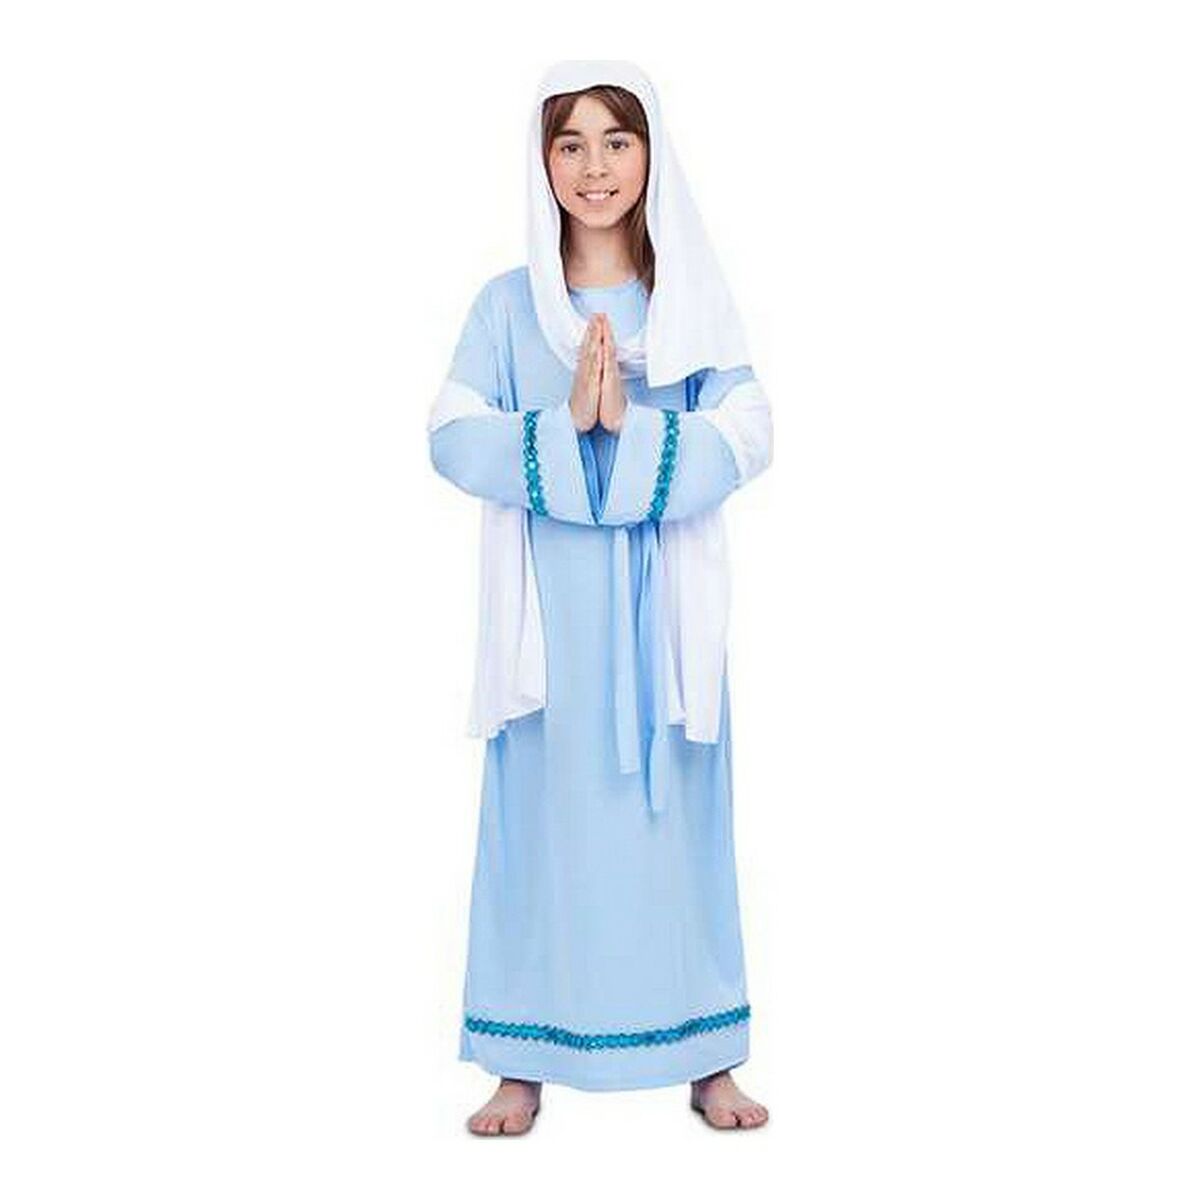 Costume for Children My Other Me Virgin Mary